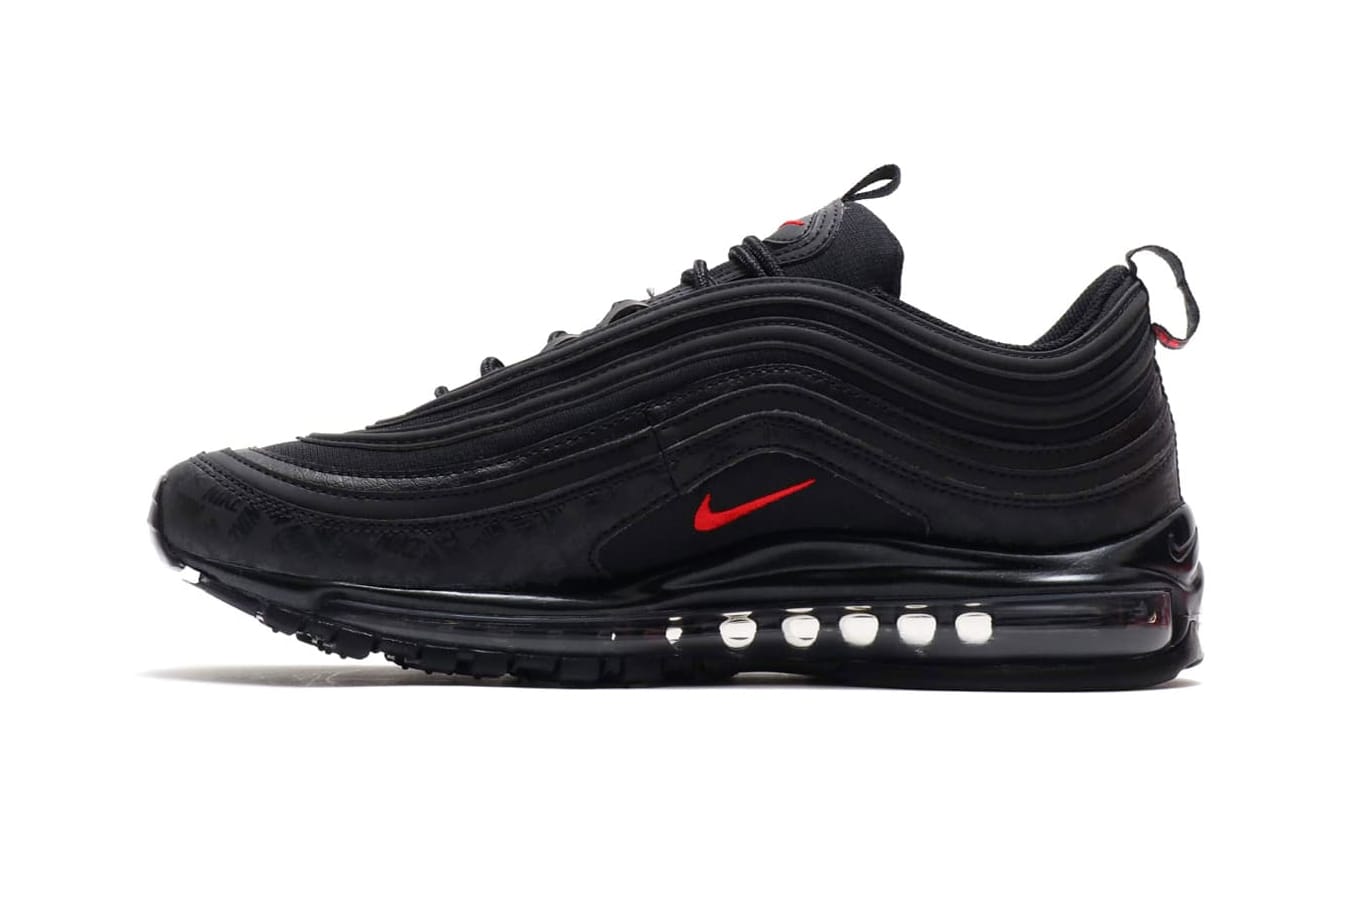 Branding on This New Air Max 97 